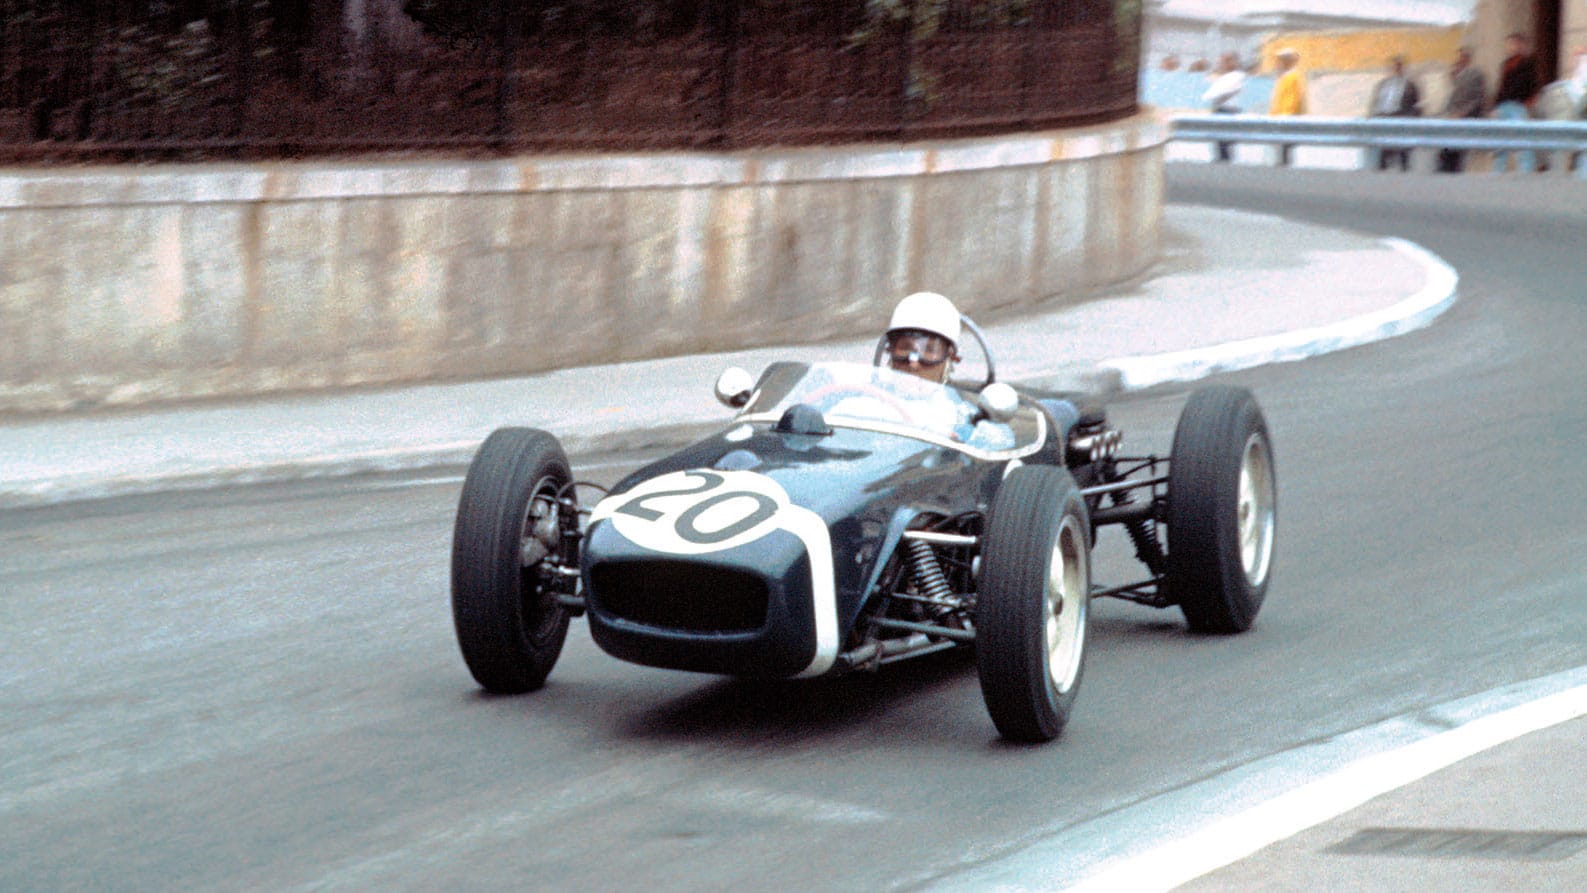 Stirling Moss at Monaco 1960